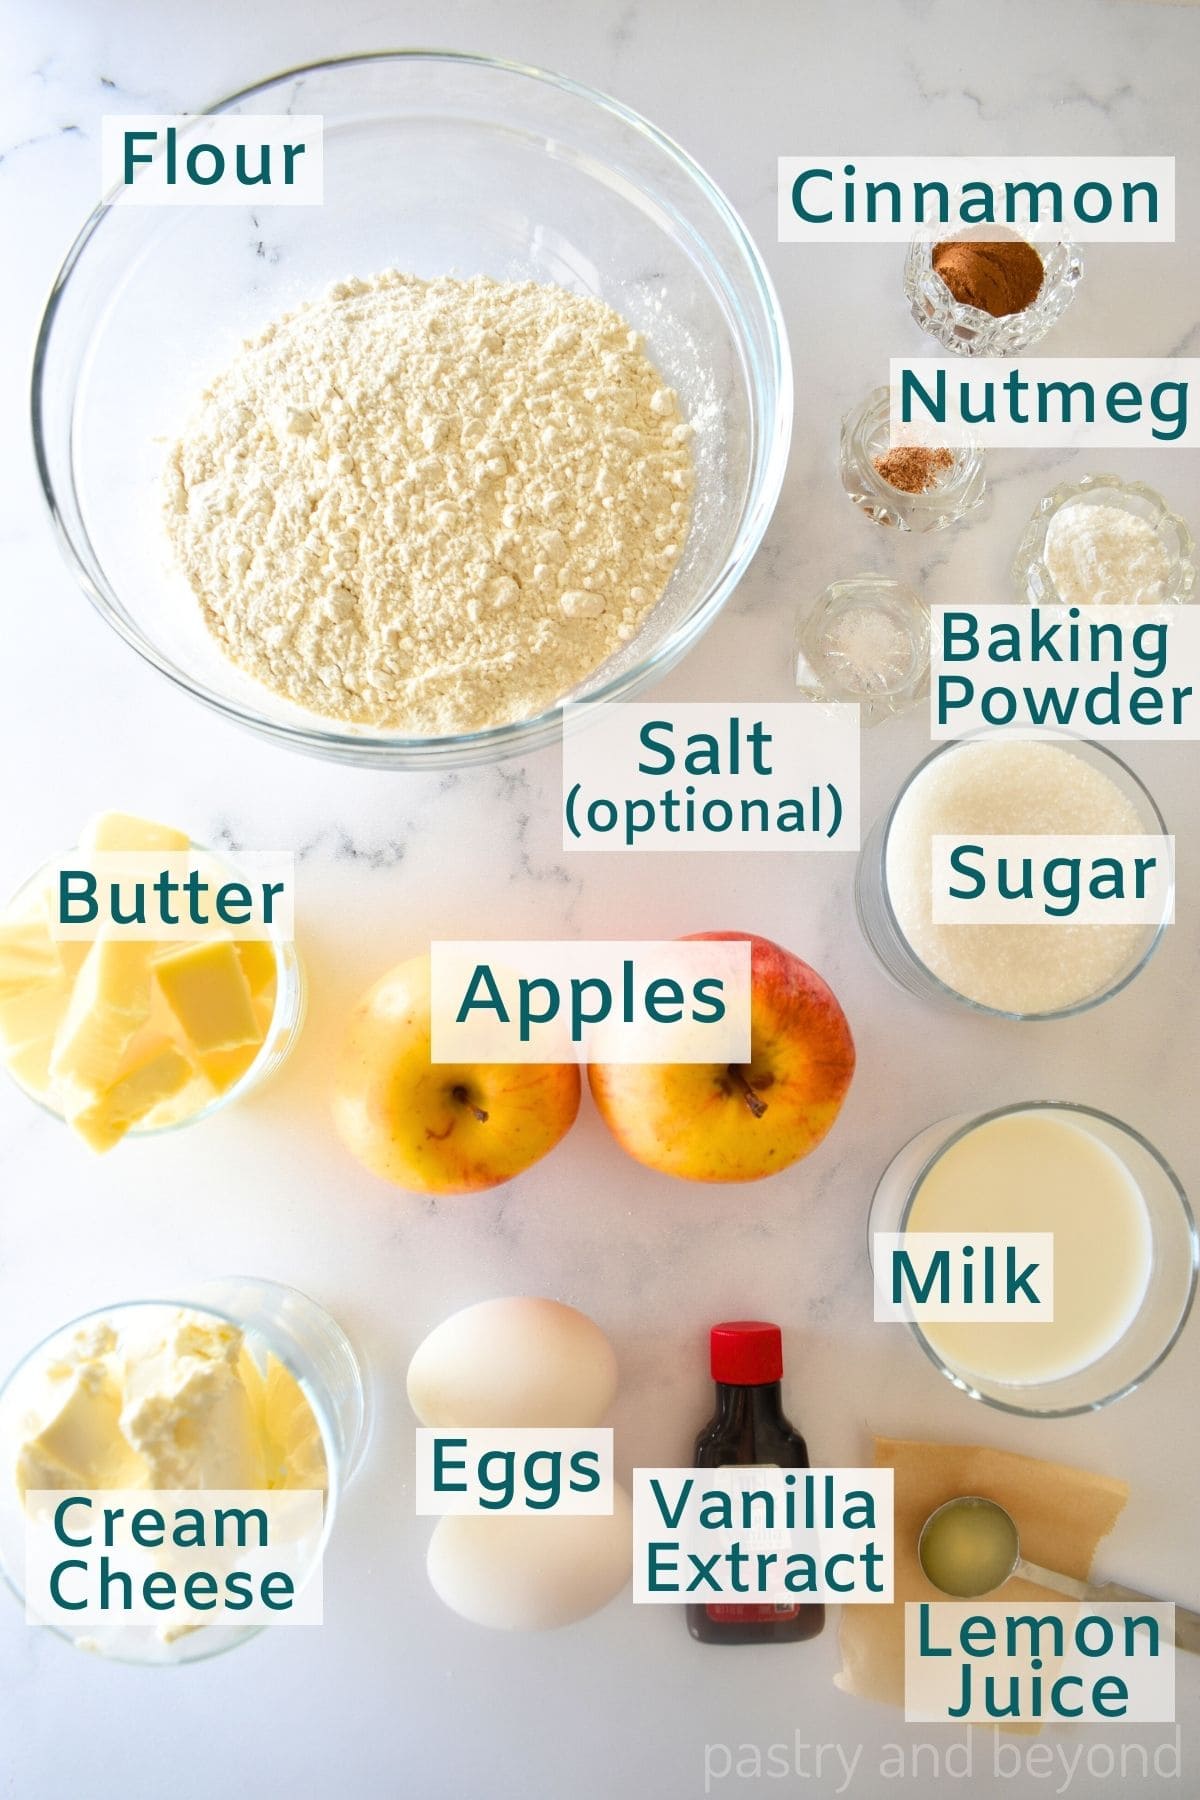 Ingredients to make apple cream cheese muffins.